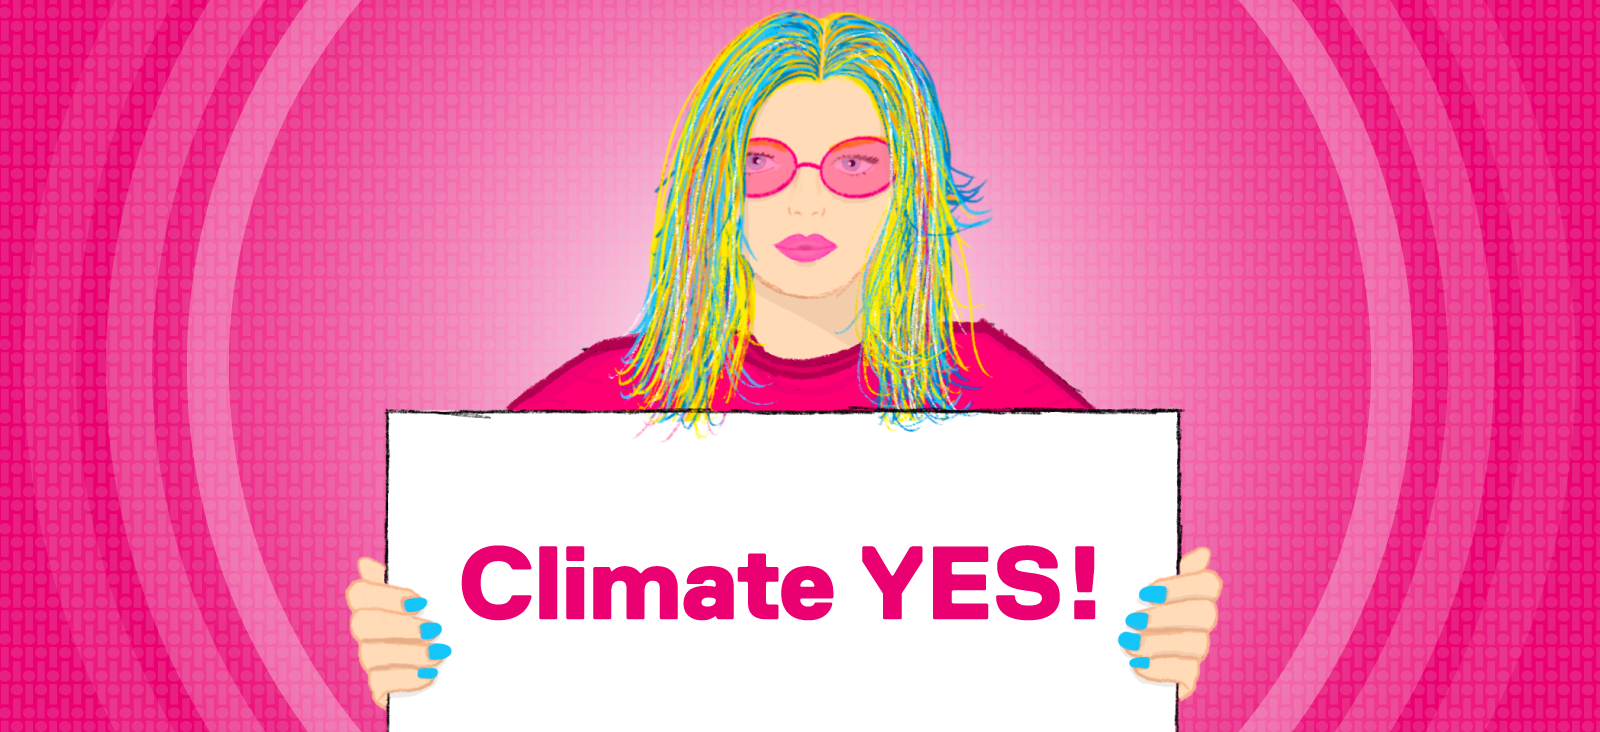 Illustration of a young woman holding a sign written "Climate YES"